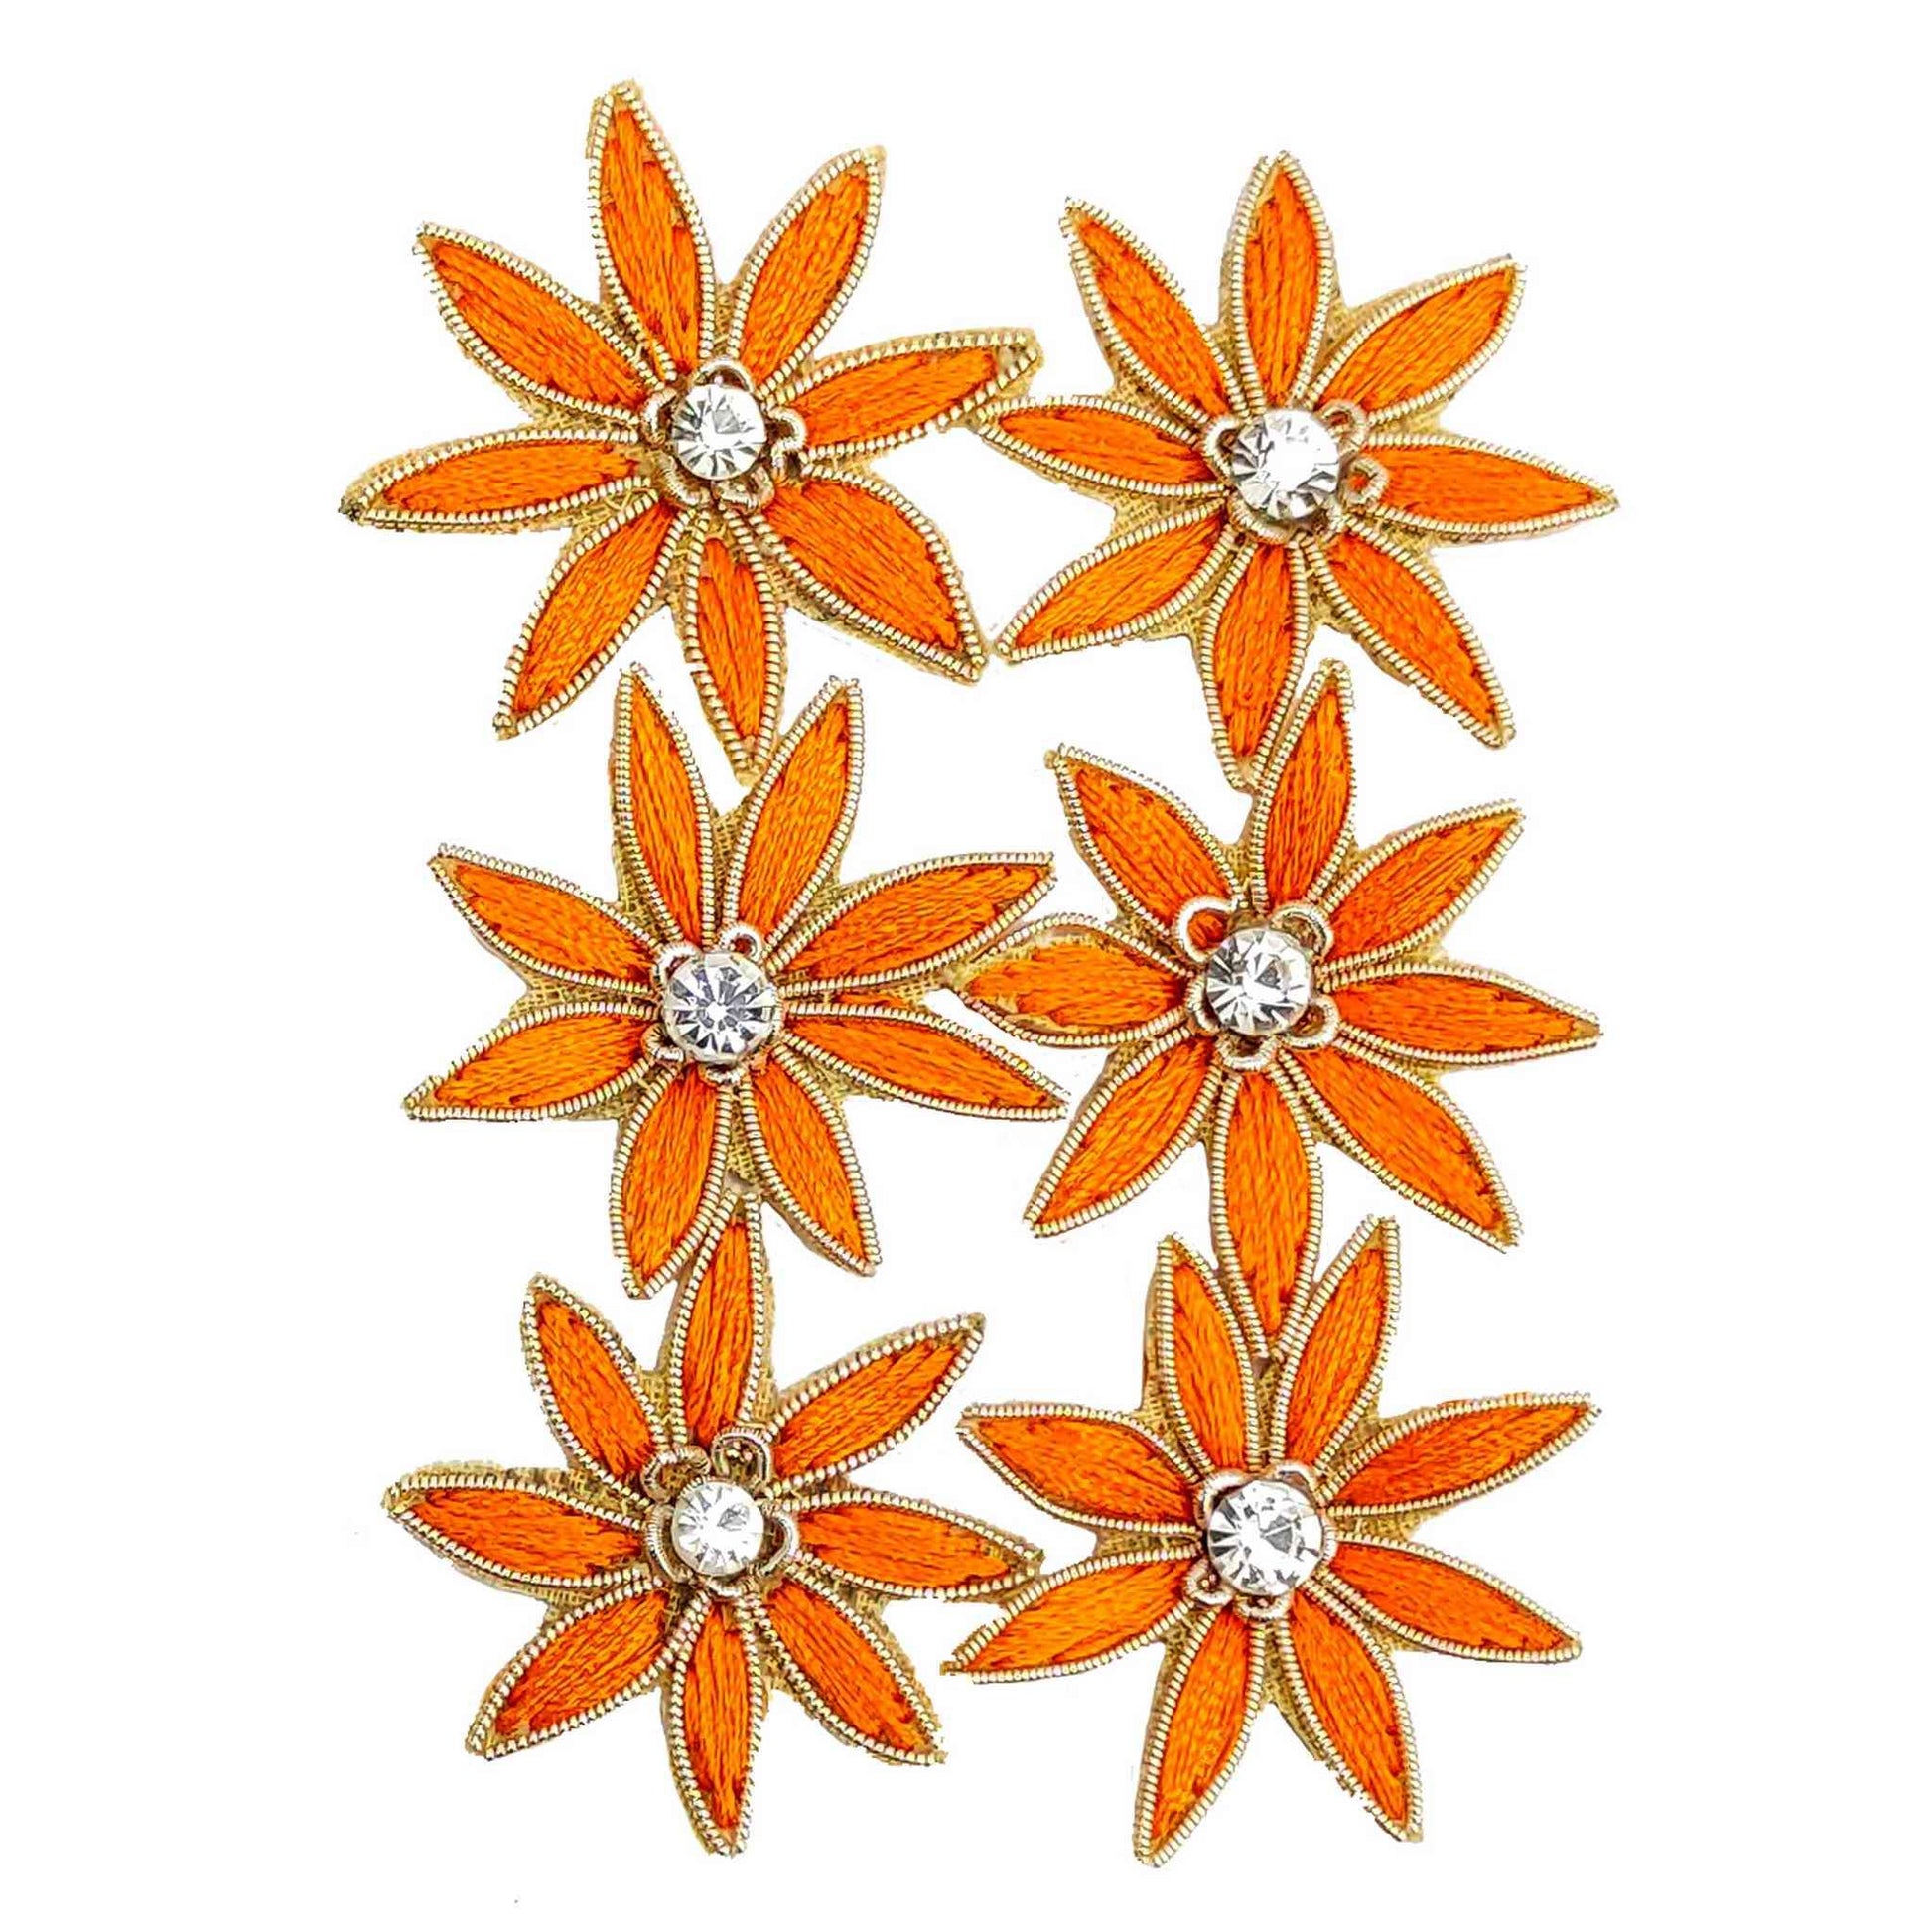 Threaded Strar Style Buti for DIY Craft, Trousseau Packing or Decoration (Bunch of 12) - Design 215, Orange - Indian Petals